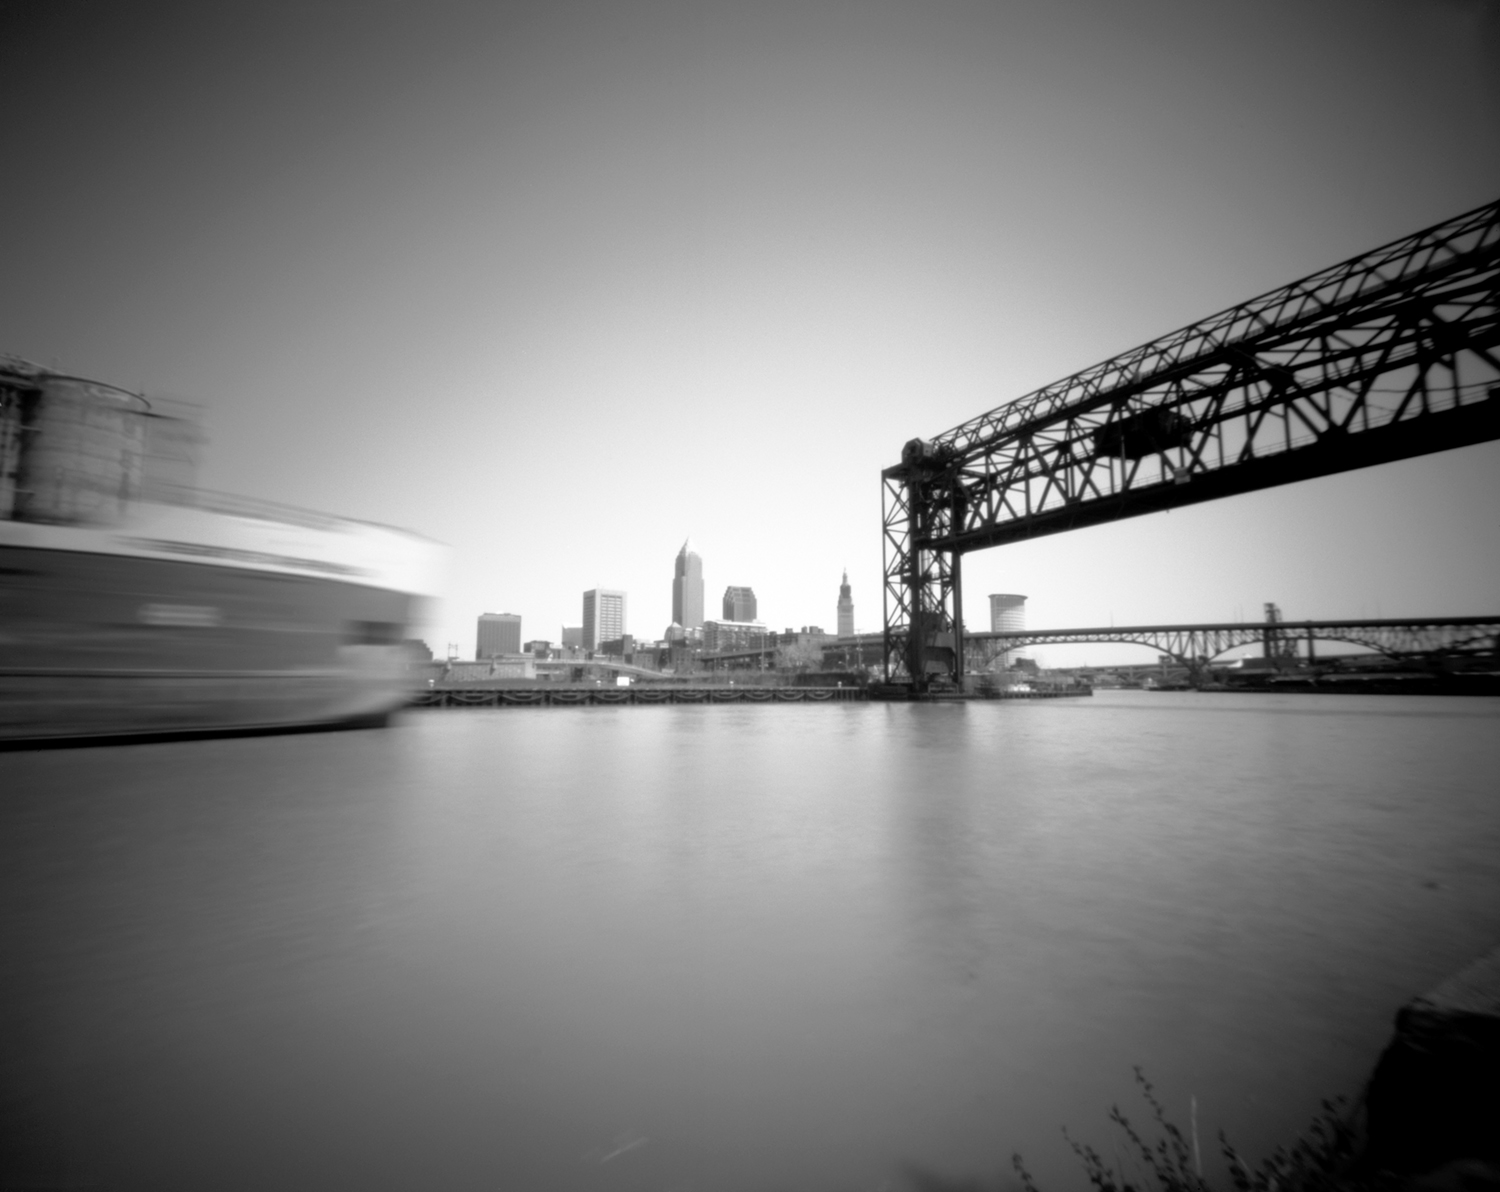  The Robert S. Pierson heads up the Cuyahoga 